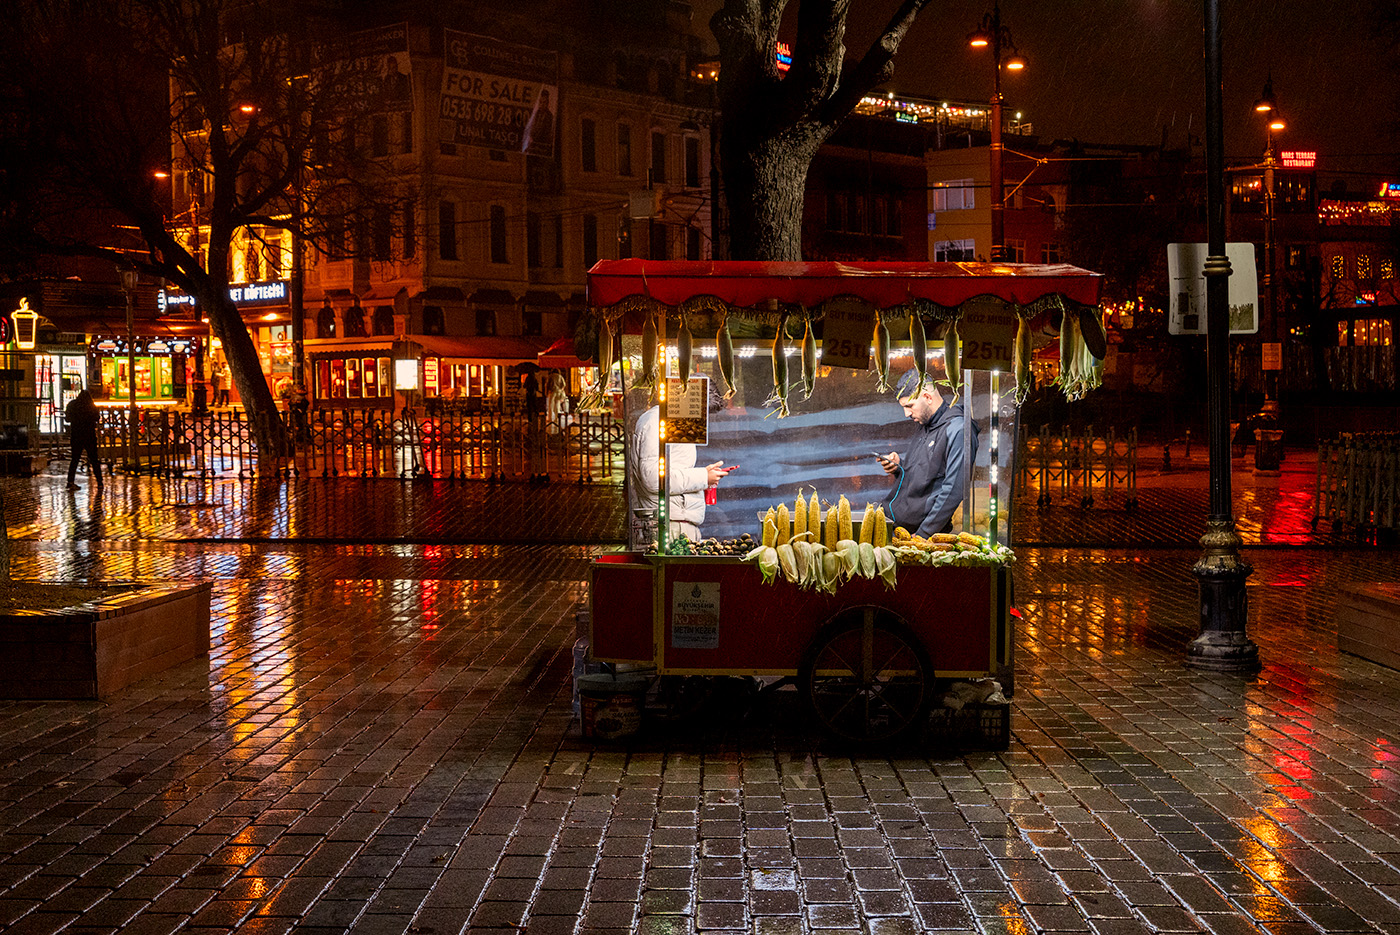 Roasted corn cart in a wet evening